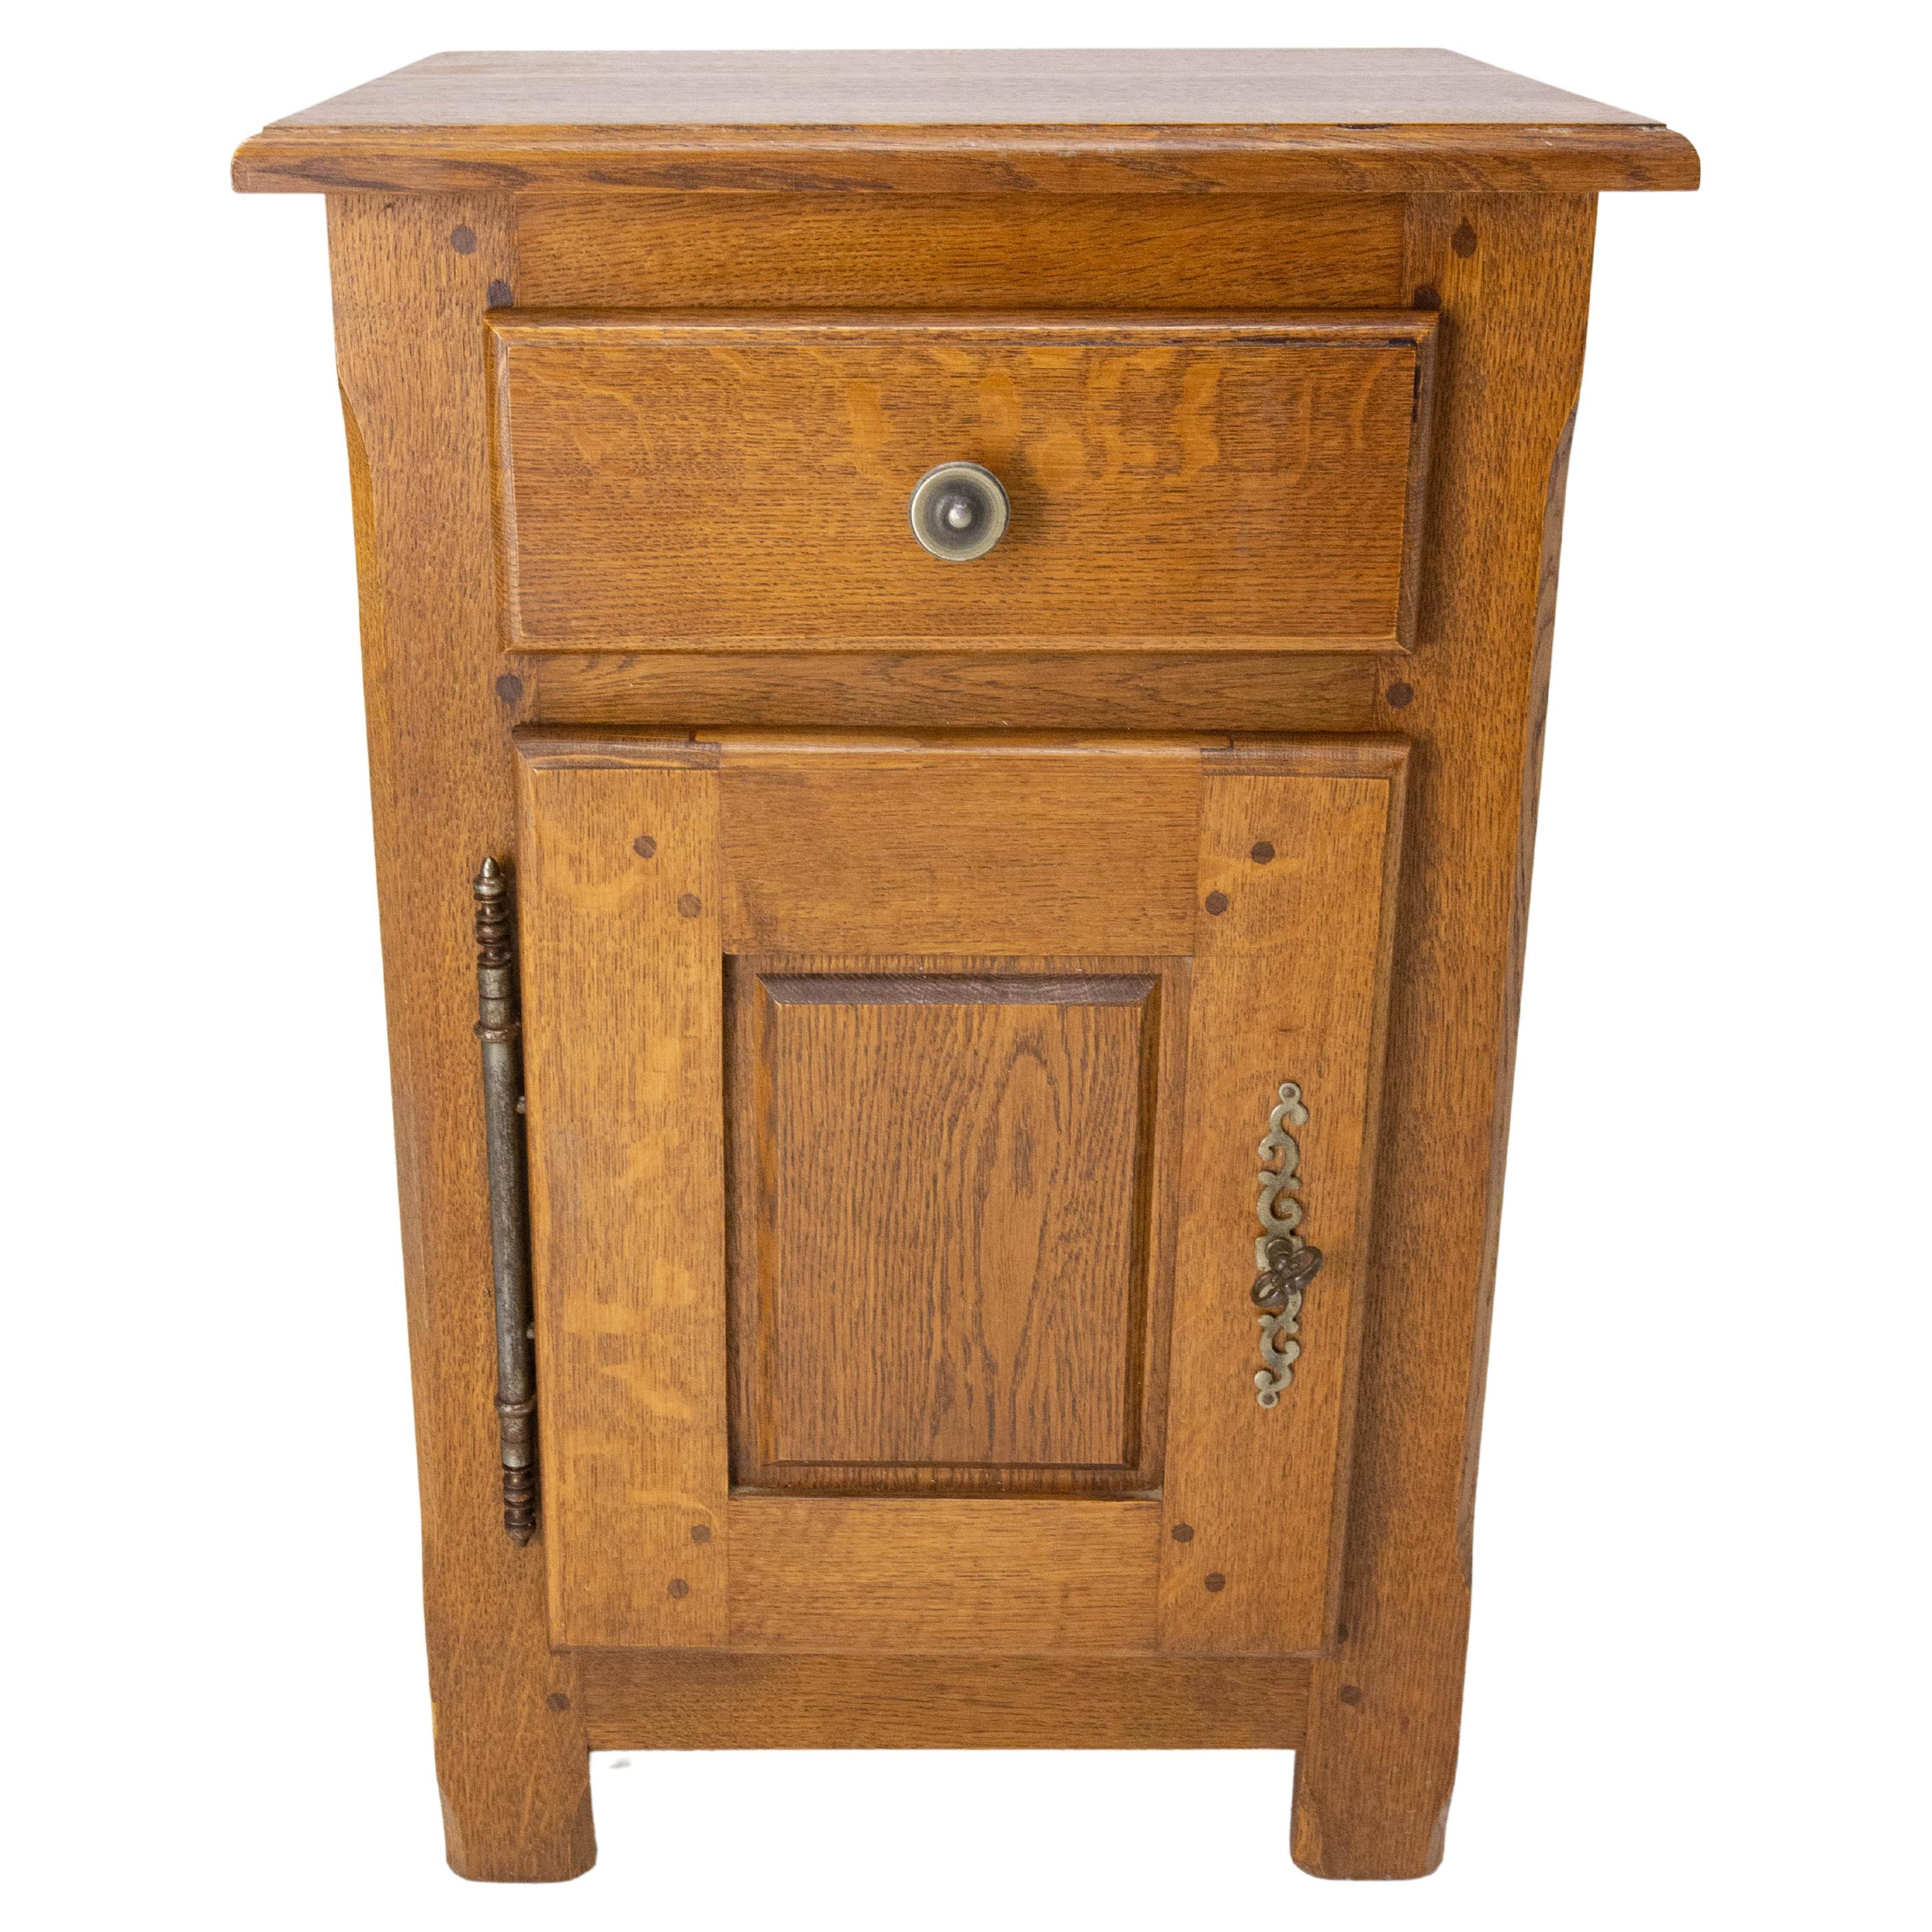 French Provincial Massive Oak Side Cabinet Nightstand Bedside Table, circa 1990